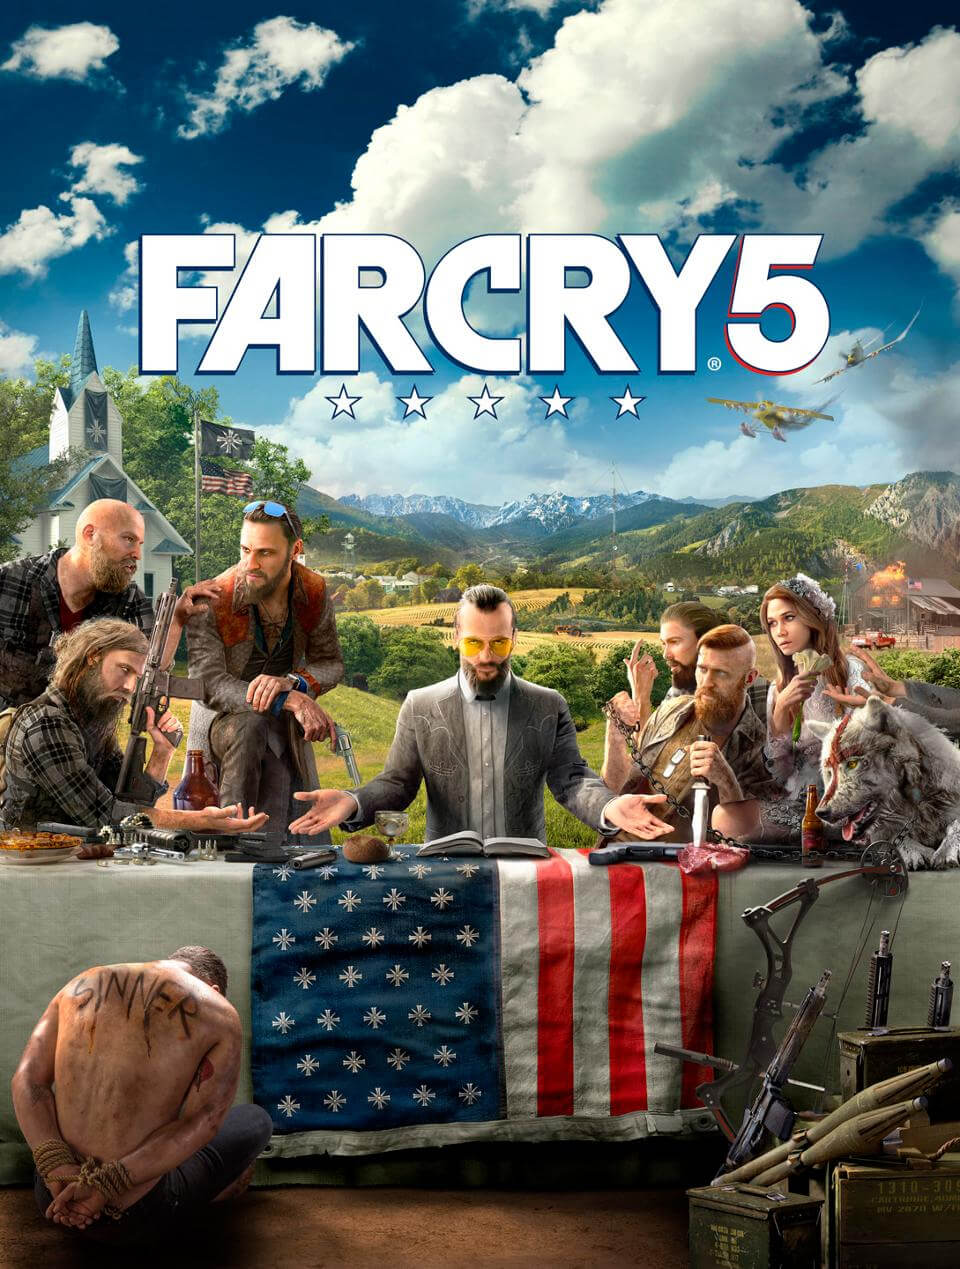 Far Cry 5's first artwork suggests the game will prove controversial among some groups